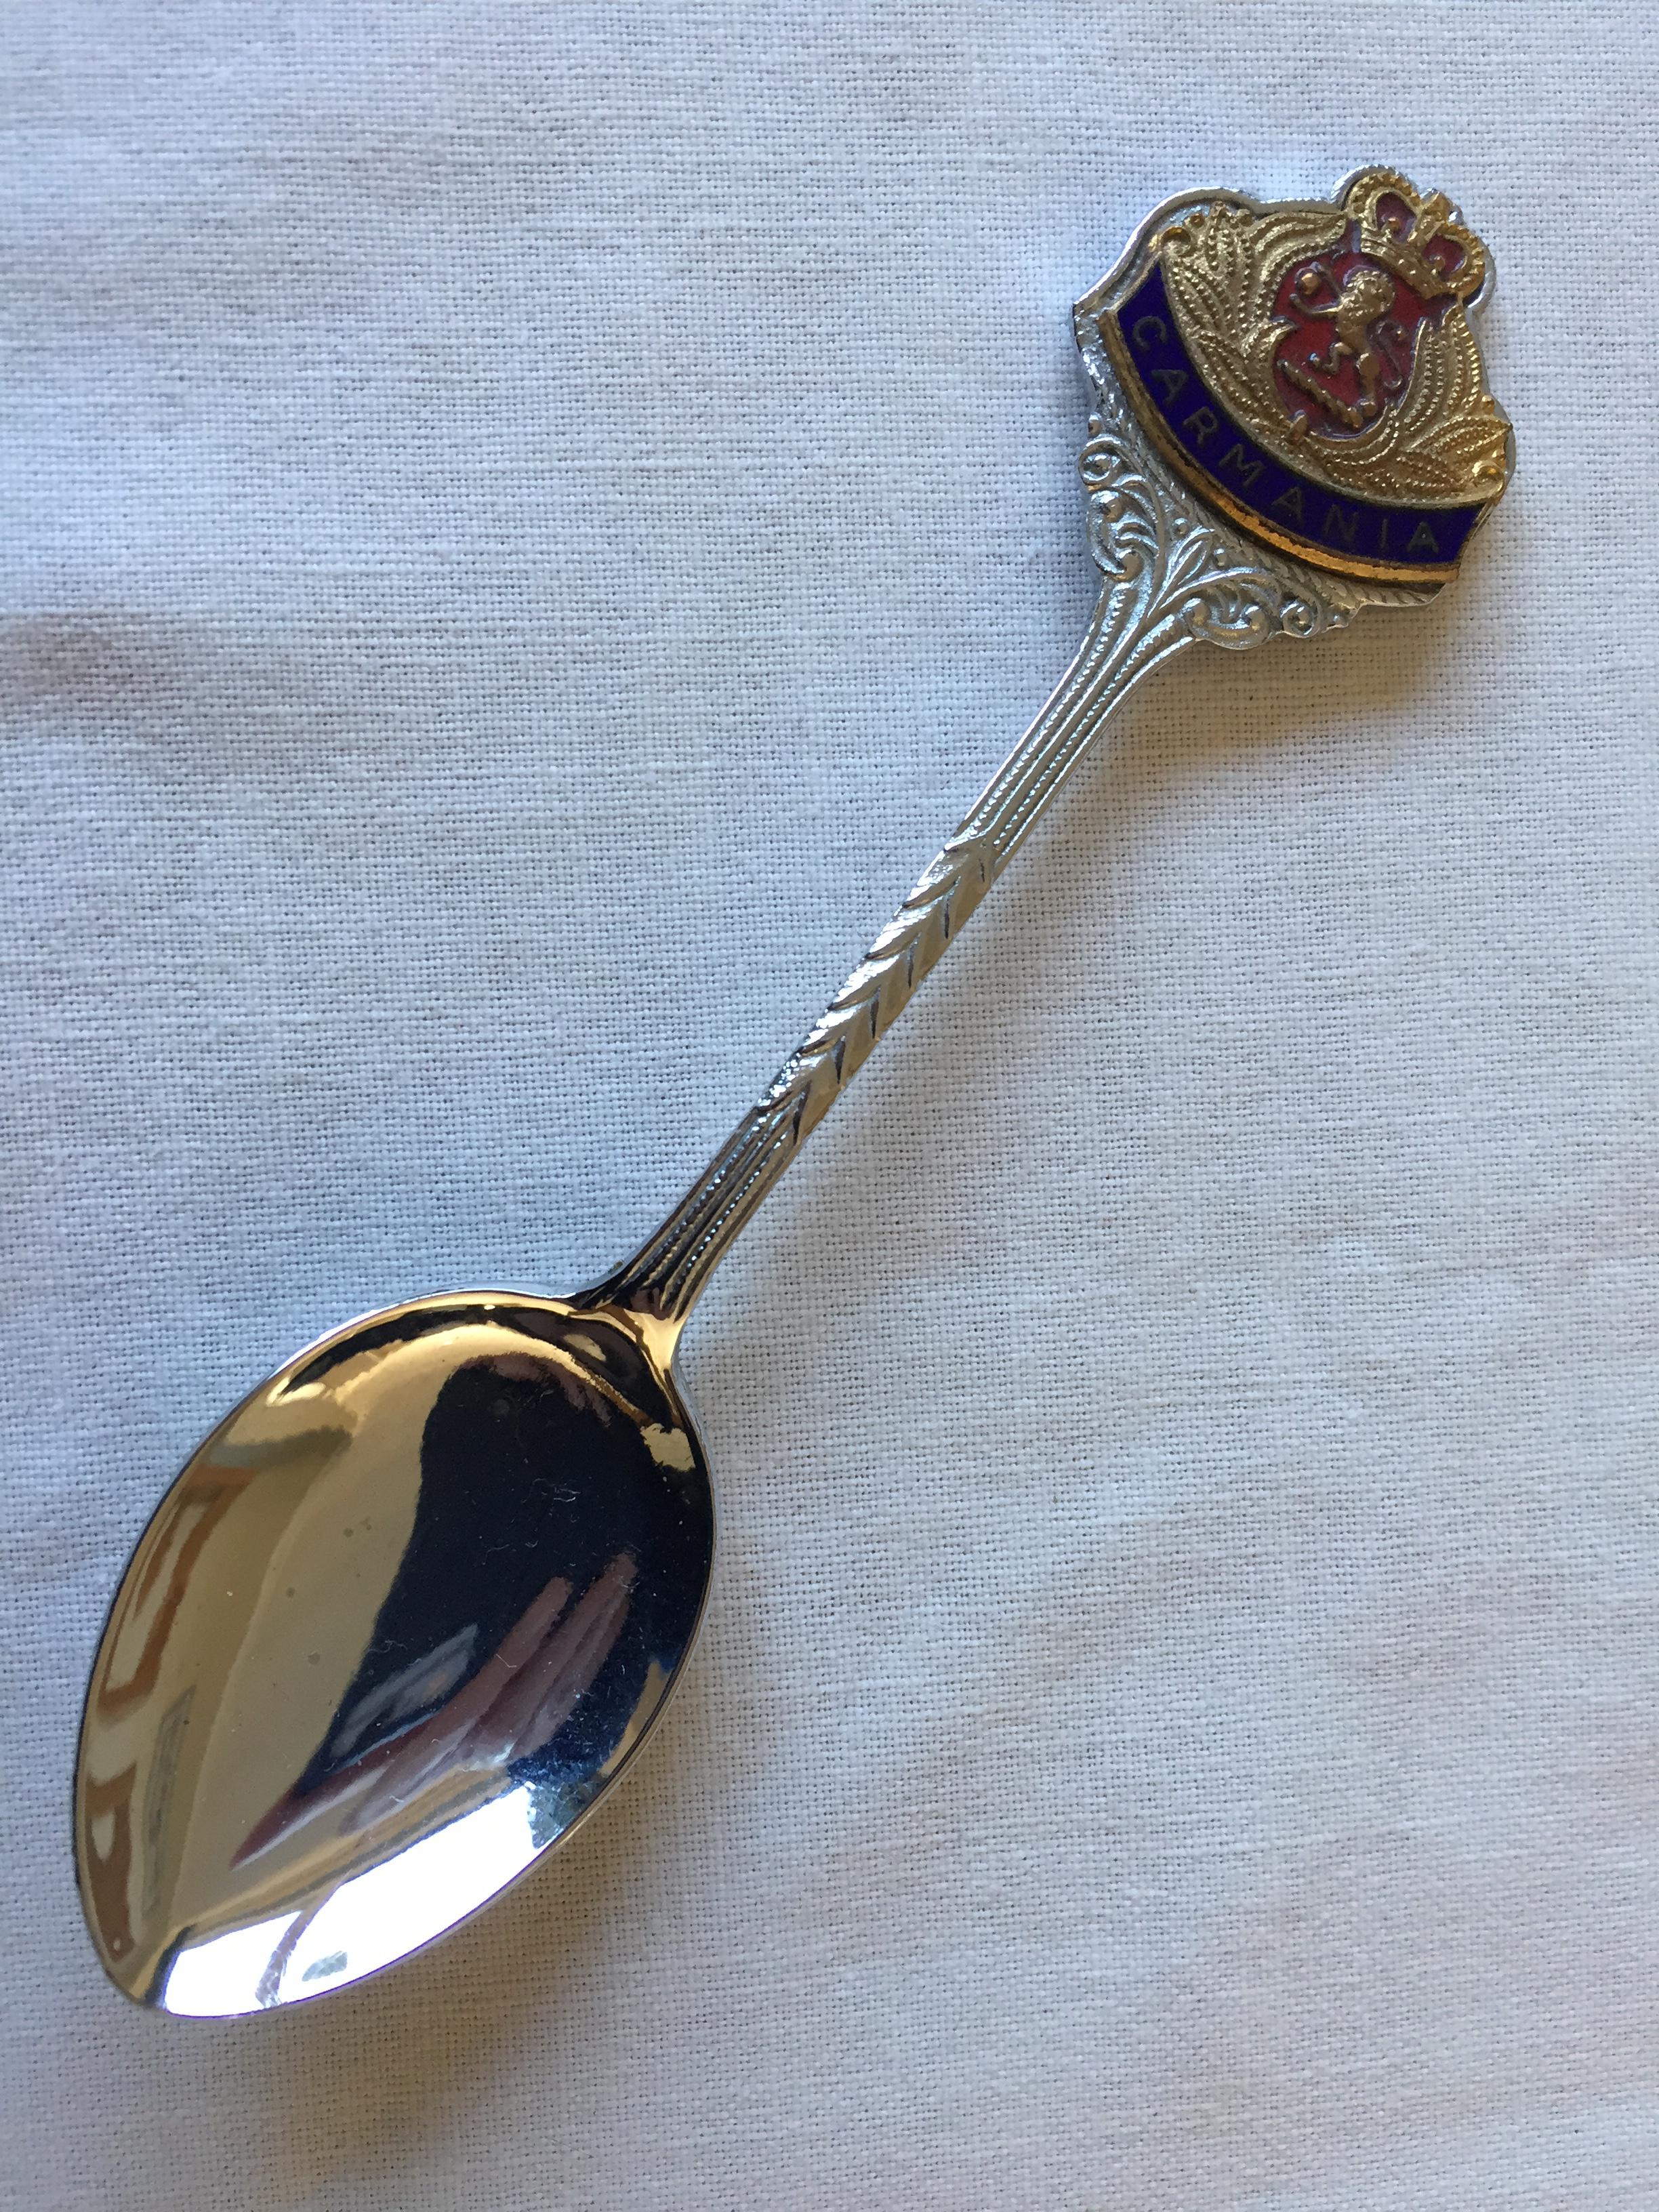 SOUVENIR SPOON FROM THE CUNARD LINE VESSEL THE RMS CARMANIA